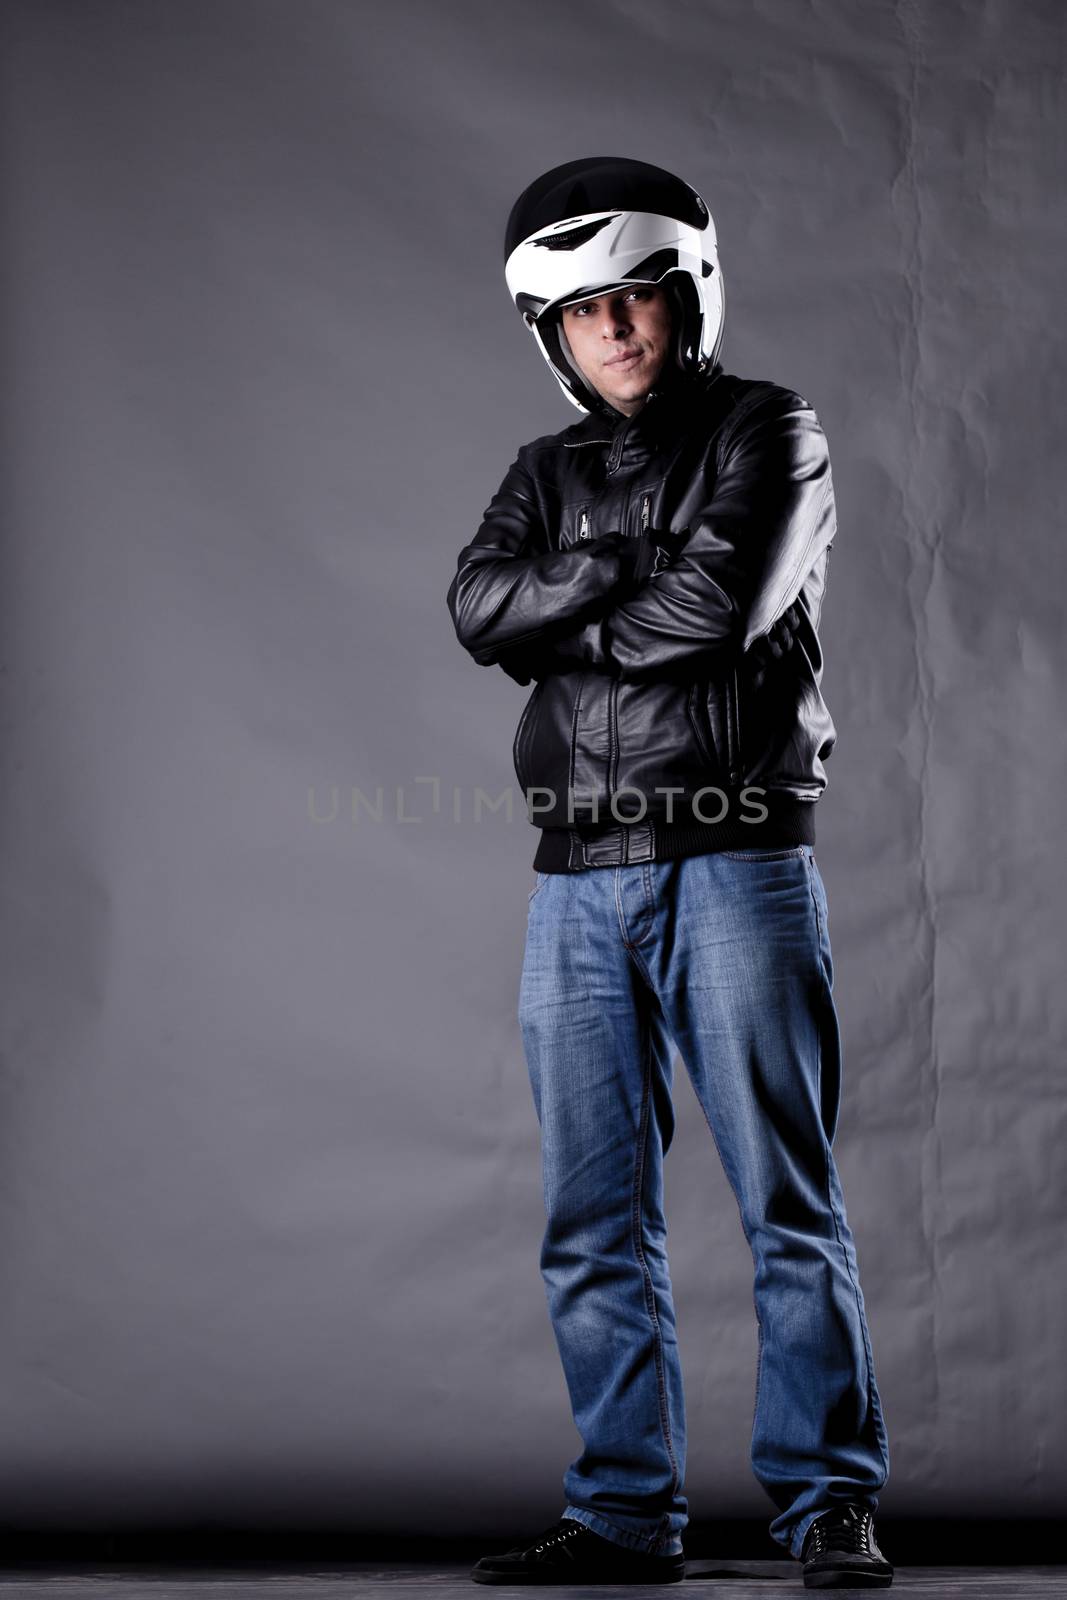 motorist with a helmet, leather jacket and jeans, on grunge background with harsh lighting